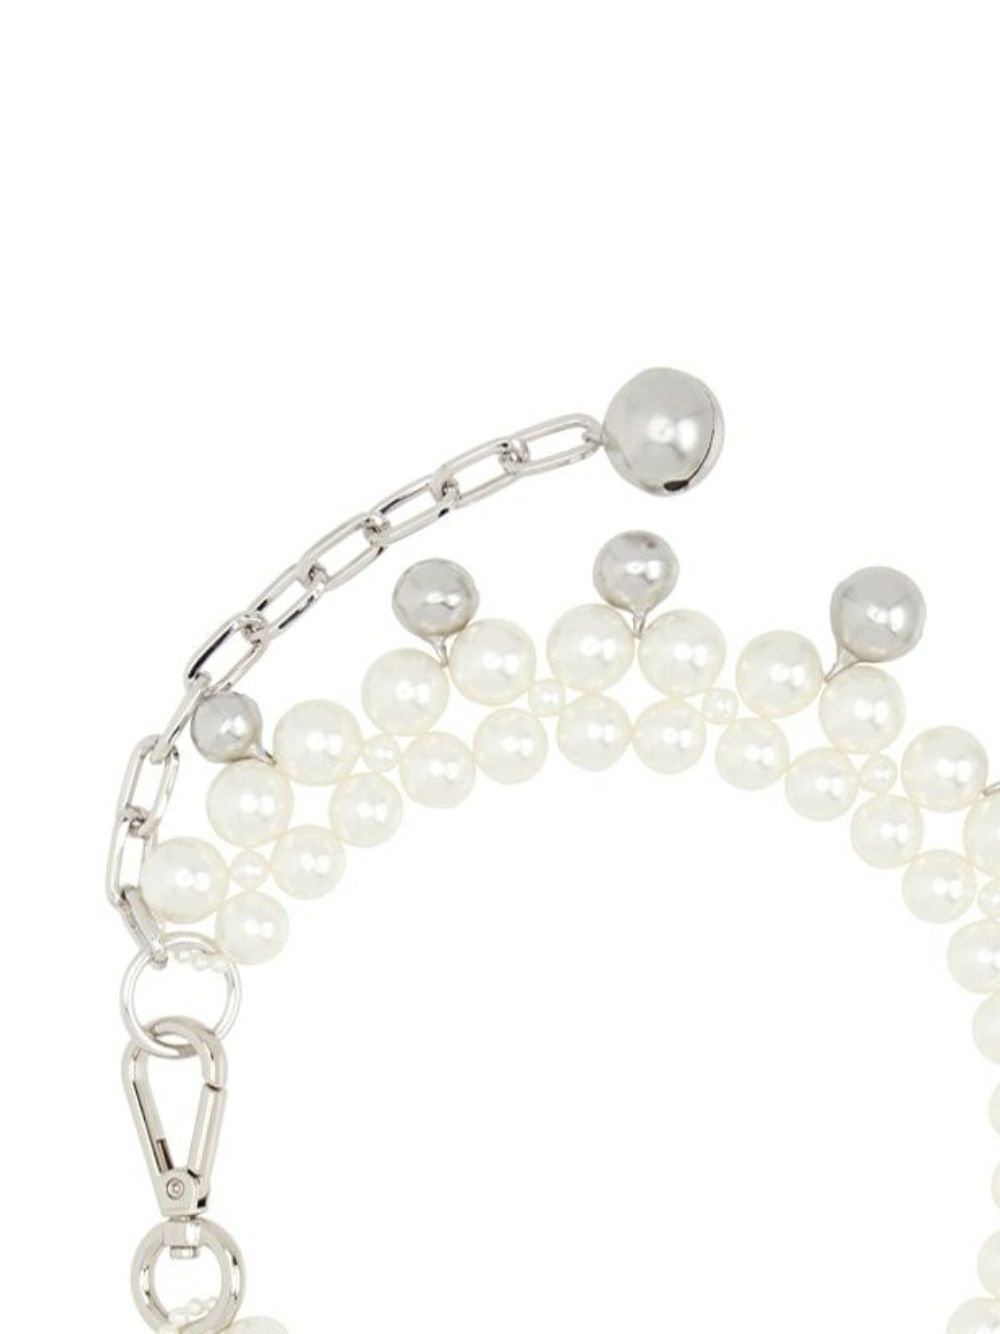 DOUBLE BELL CHARM AND PEARL NECKLACE - 2